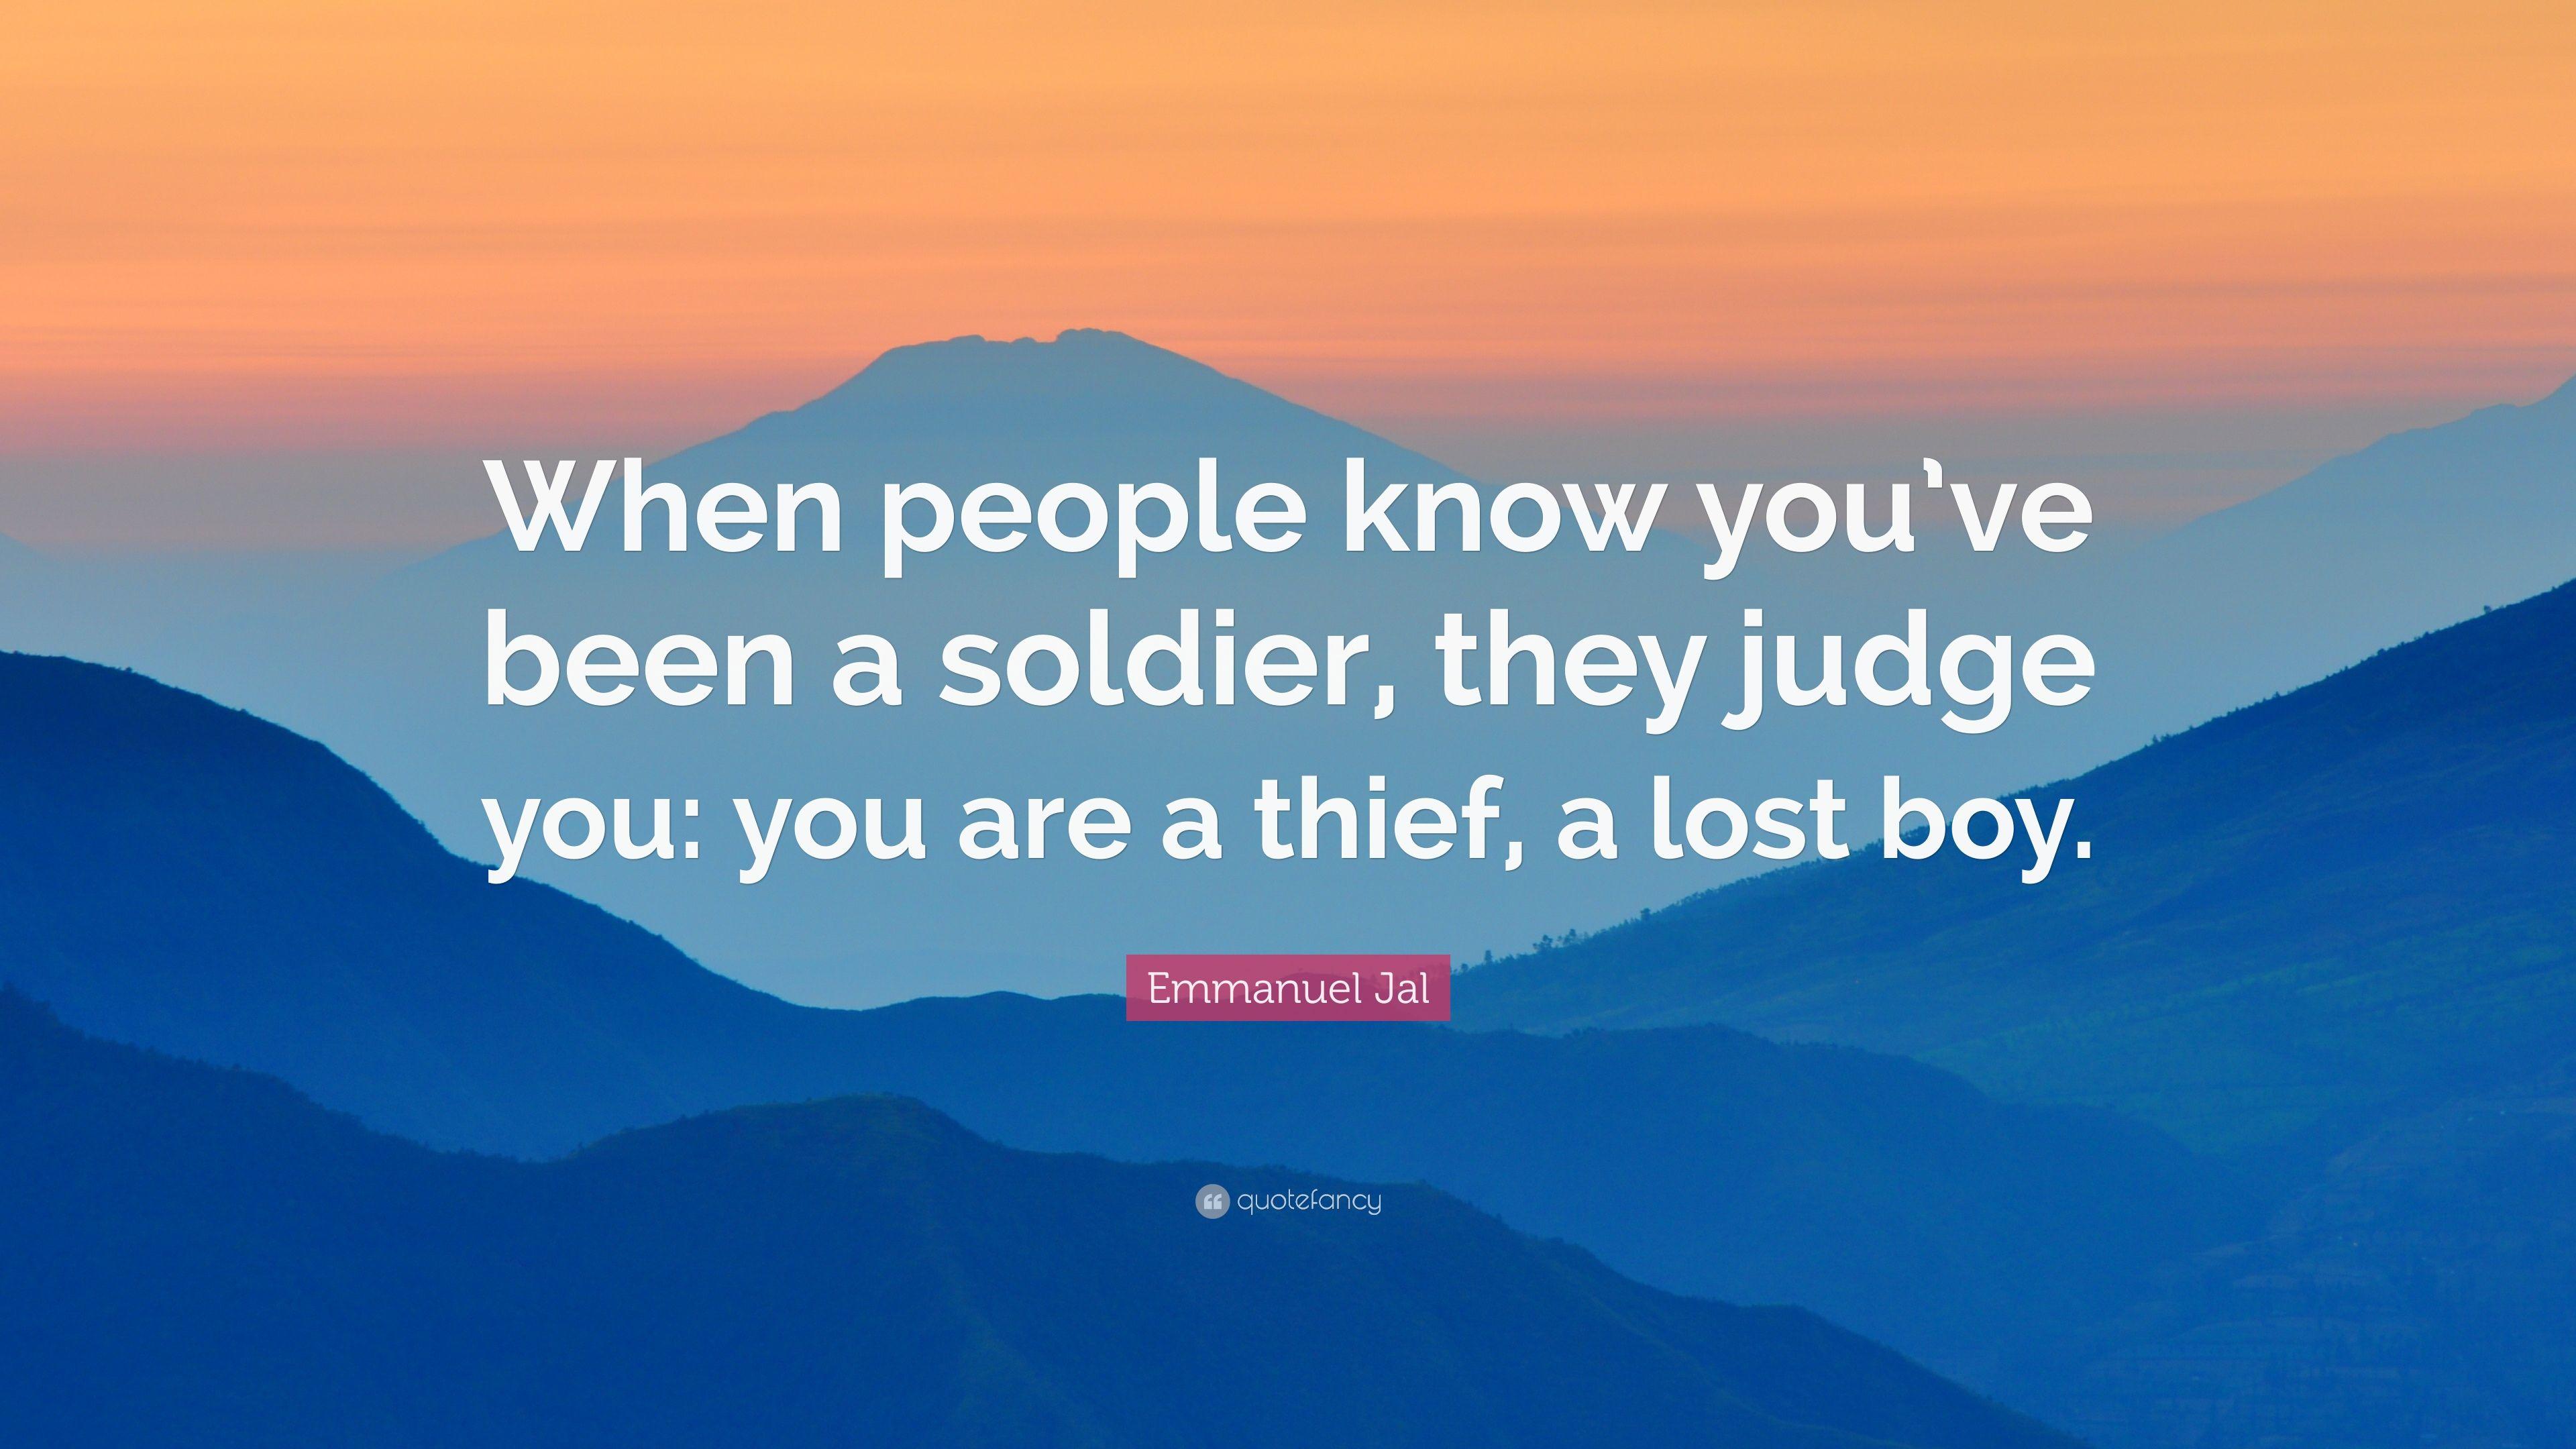 Emmanuel Jal Quote: “When people know you've been a soldier, they